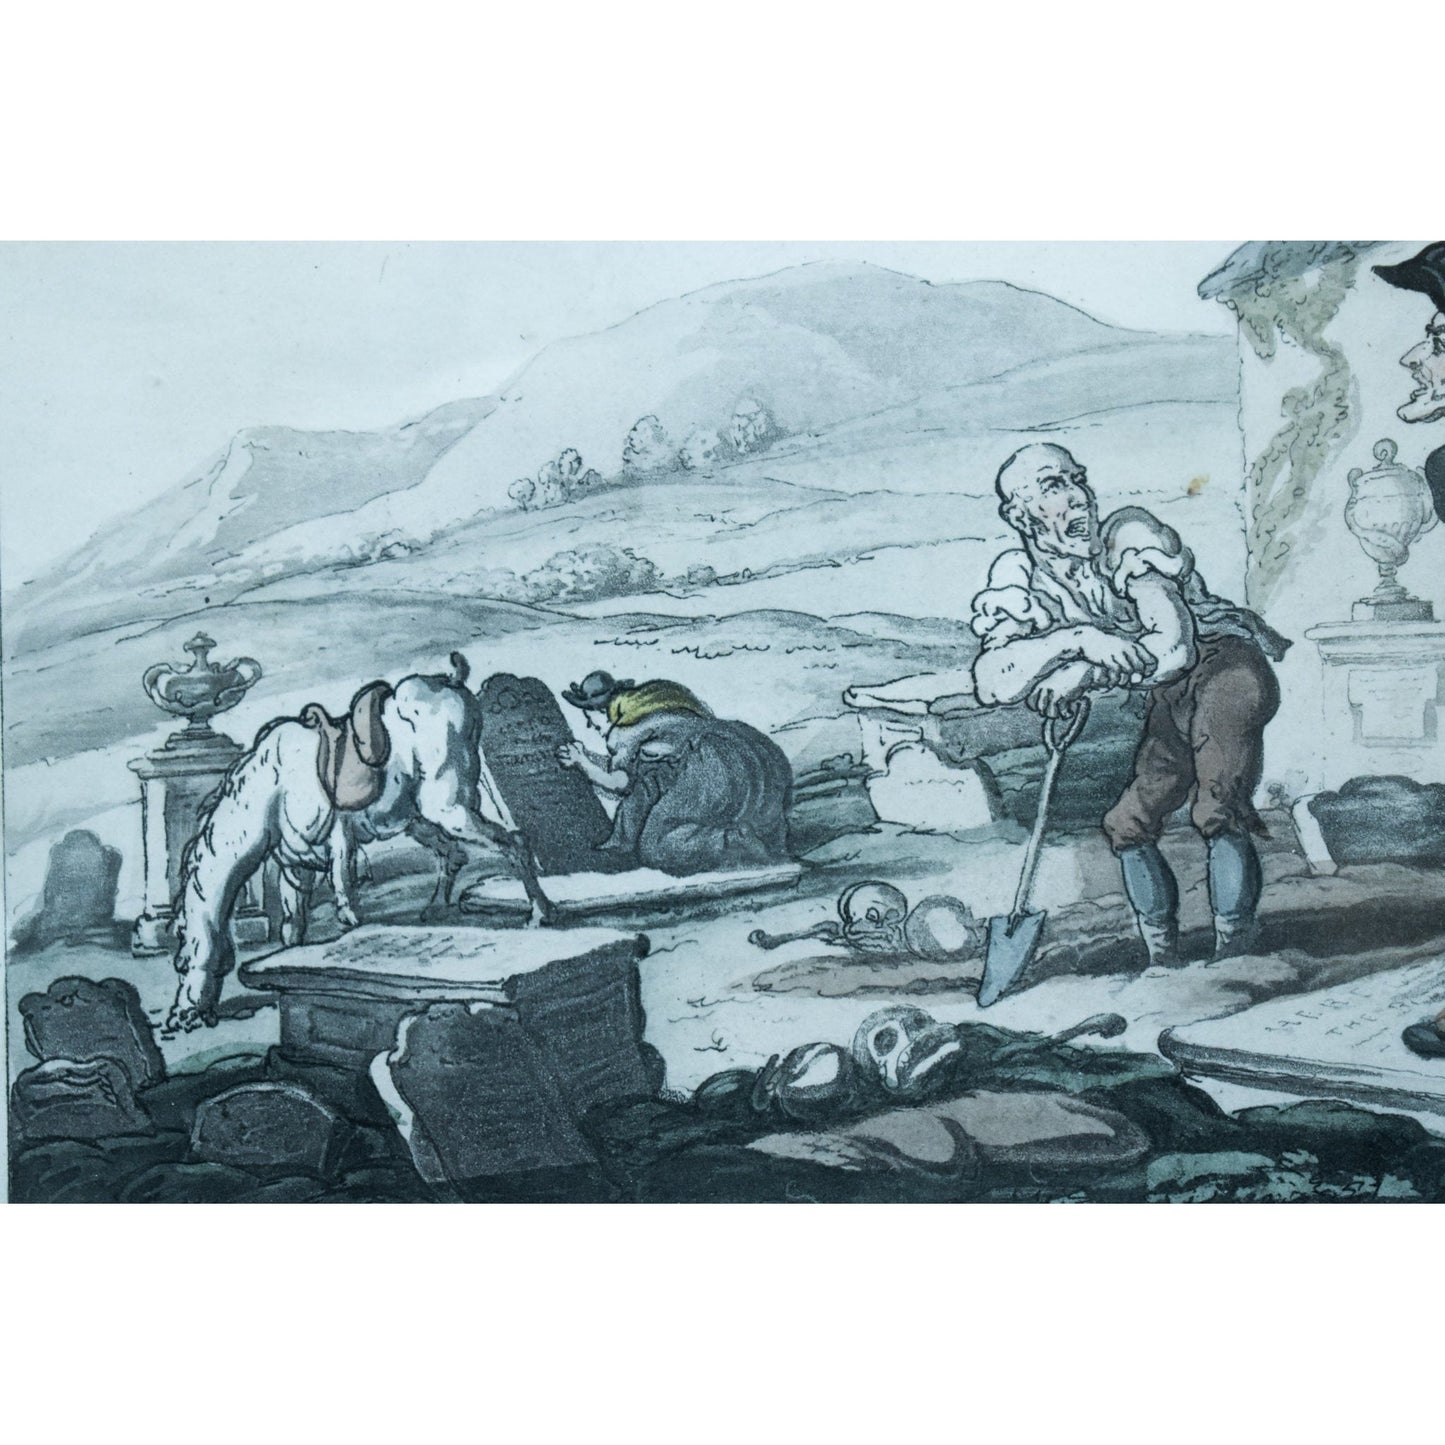 Thomas Rowlandson etching entitled Doctor Syntax Meditating on the Tomb Stones original 1813 for sale at Winckelmann Gallery